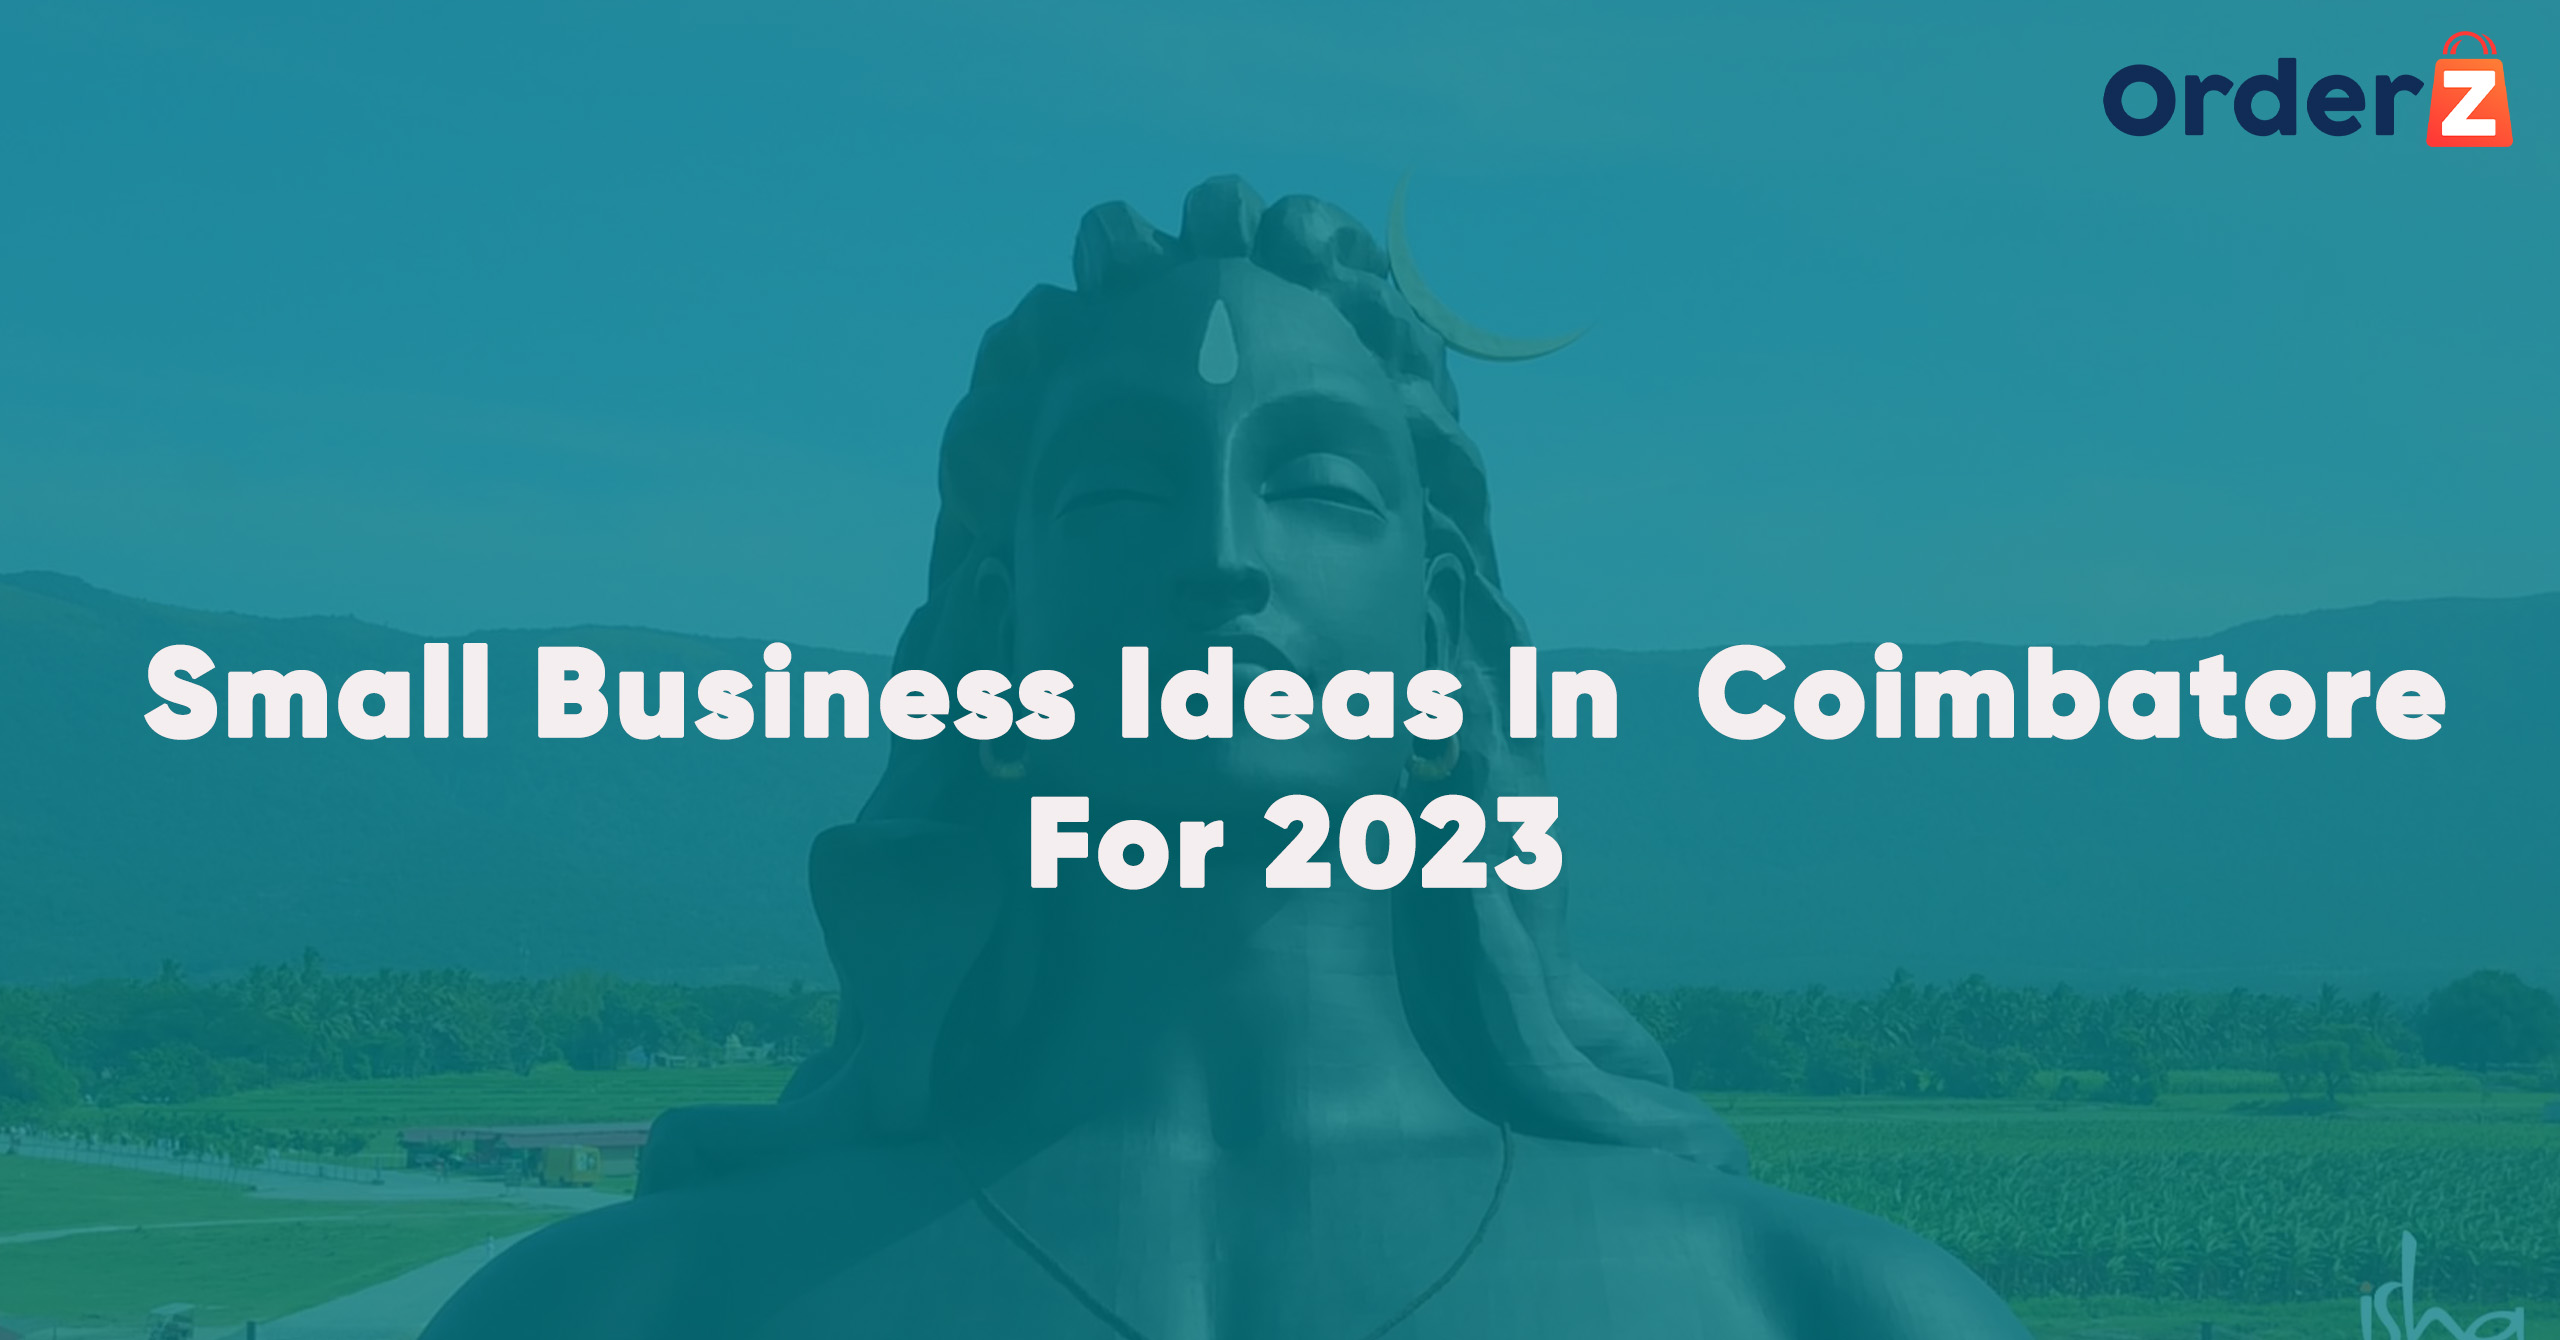 Small Business Ideas In Coimbatore For 2023